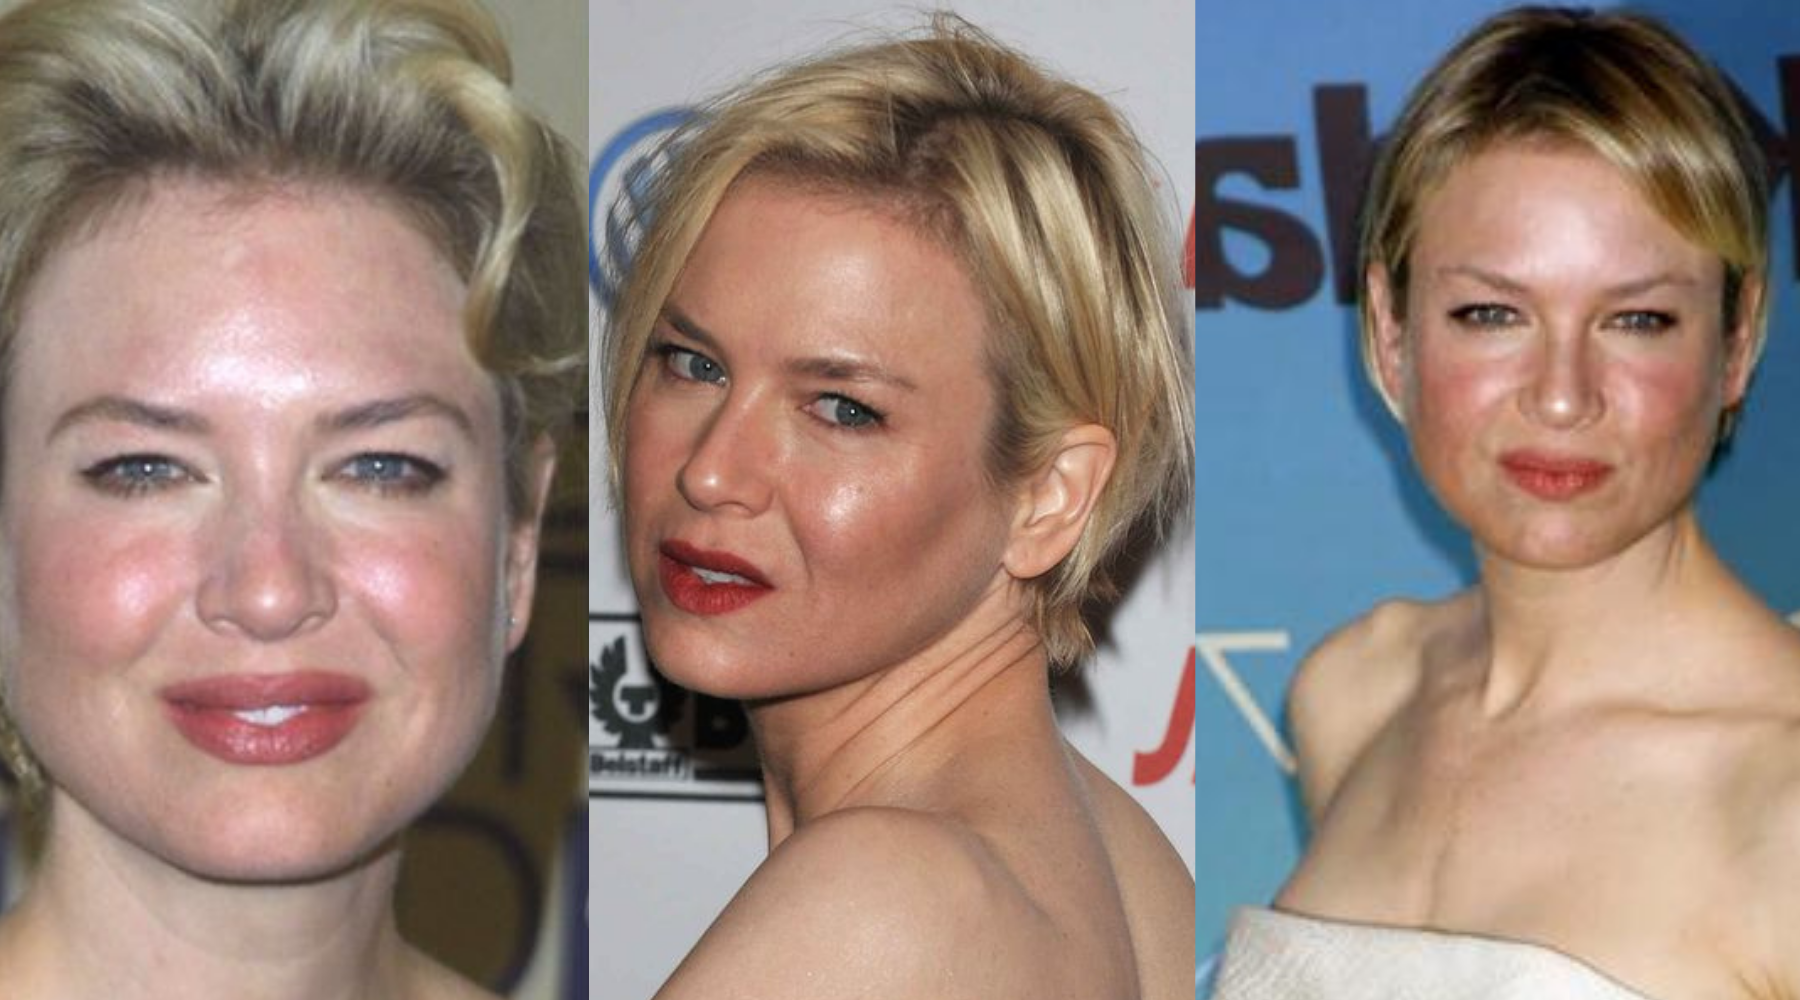 The photograph shows Hollywood Actress, Renée Zellweger, photographed at film premiers throughout the last twenty years.